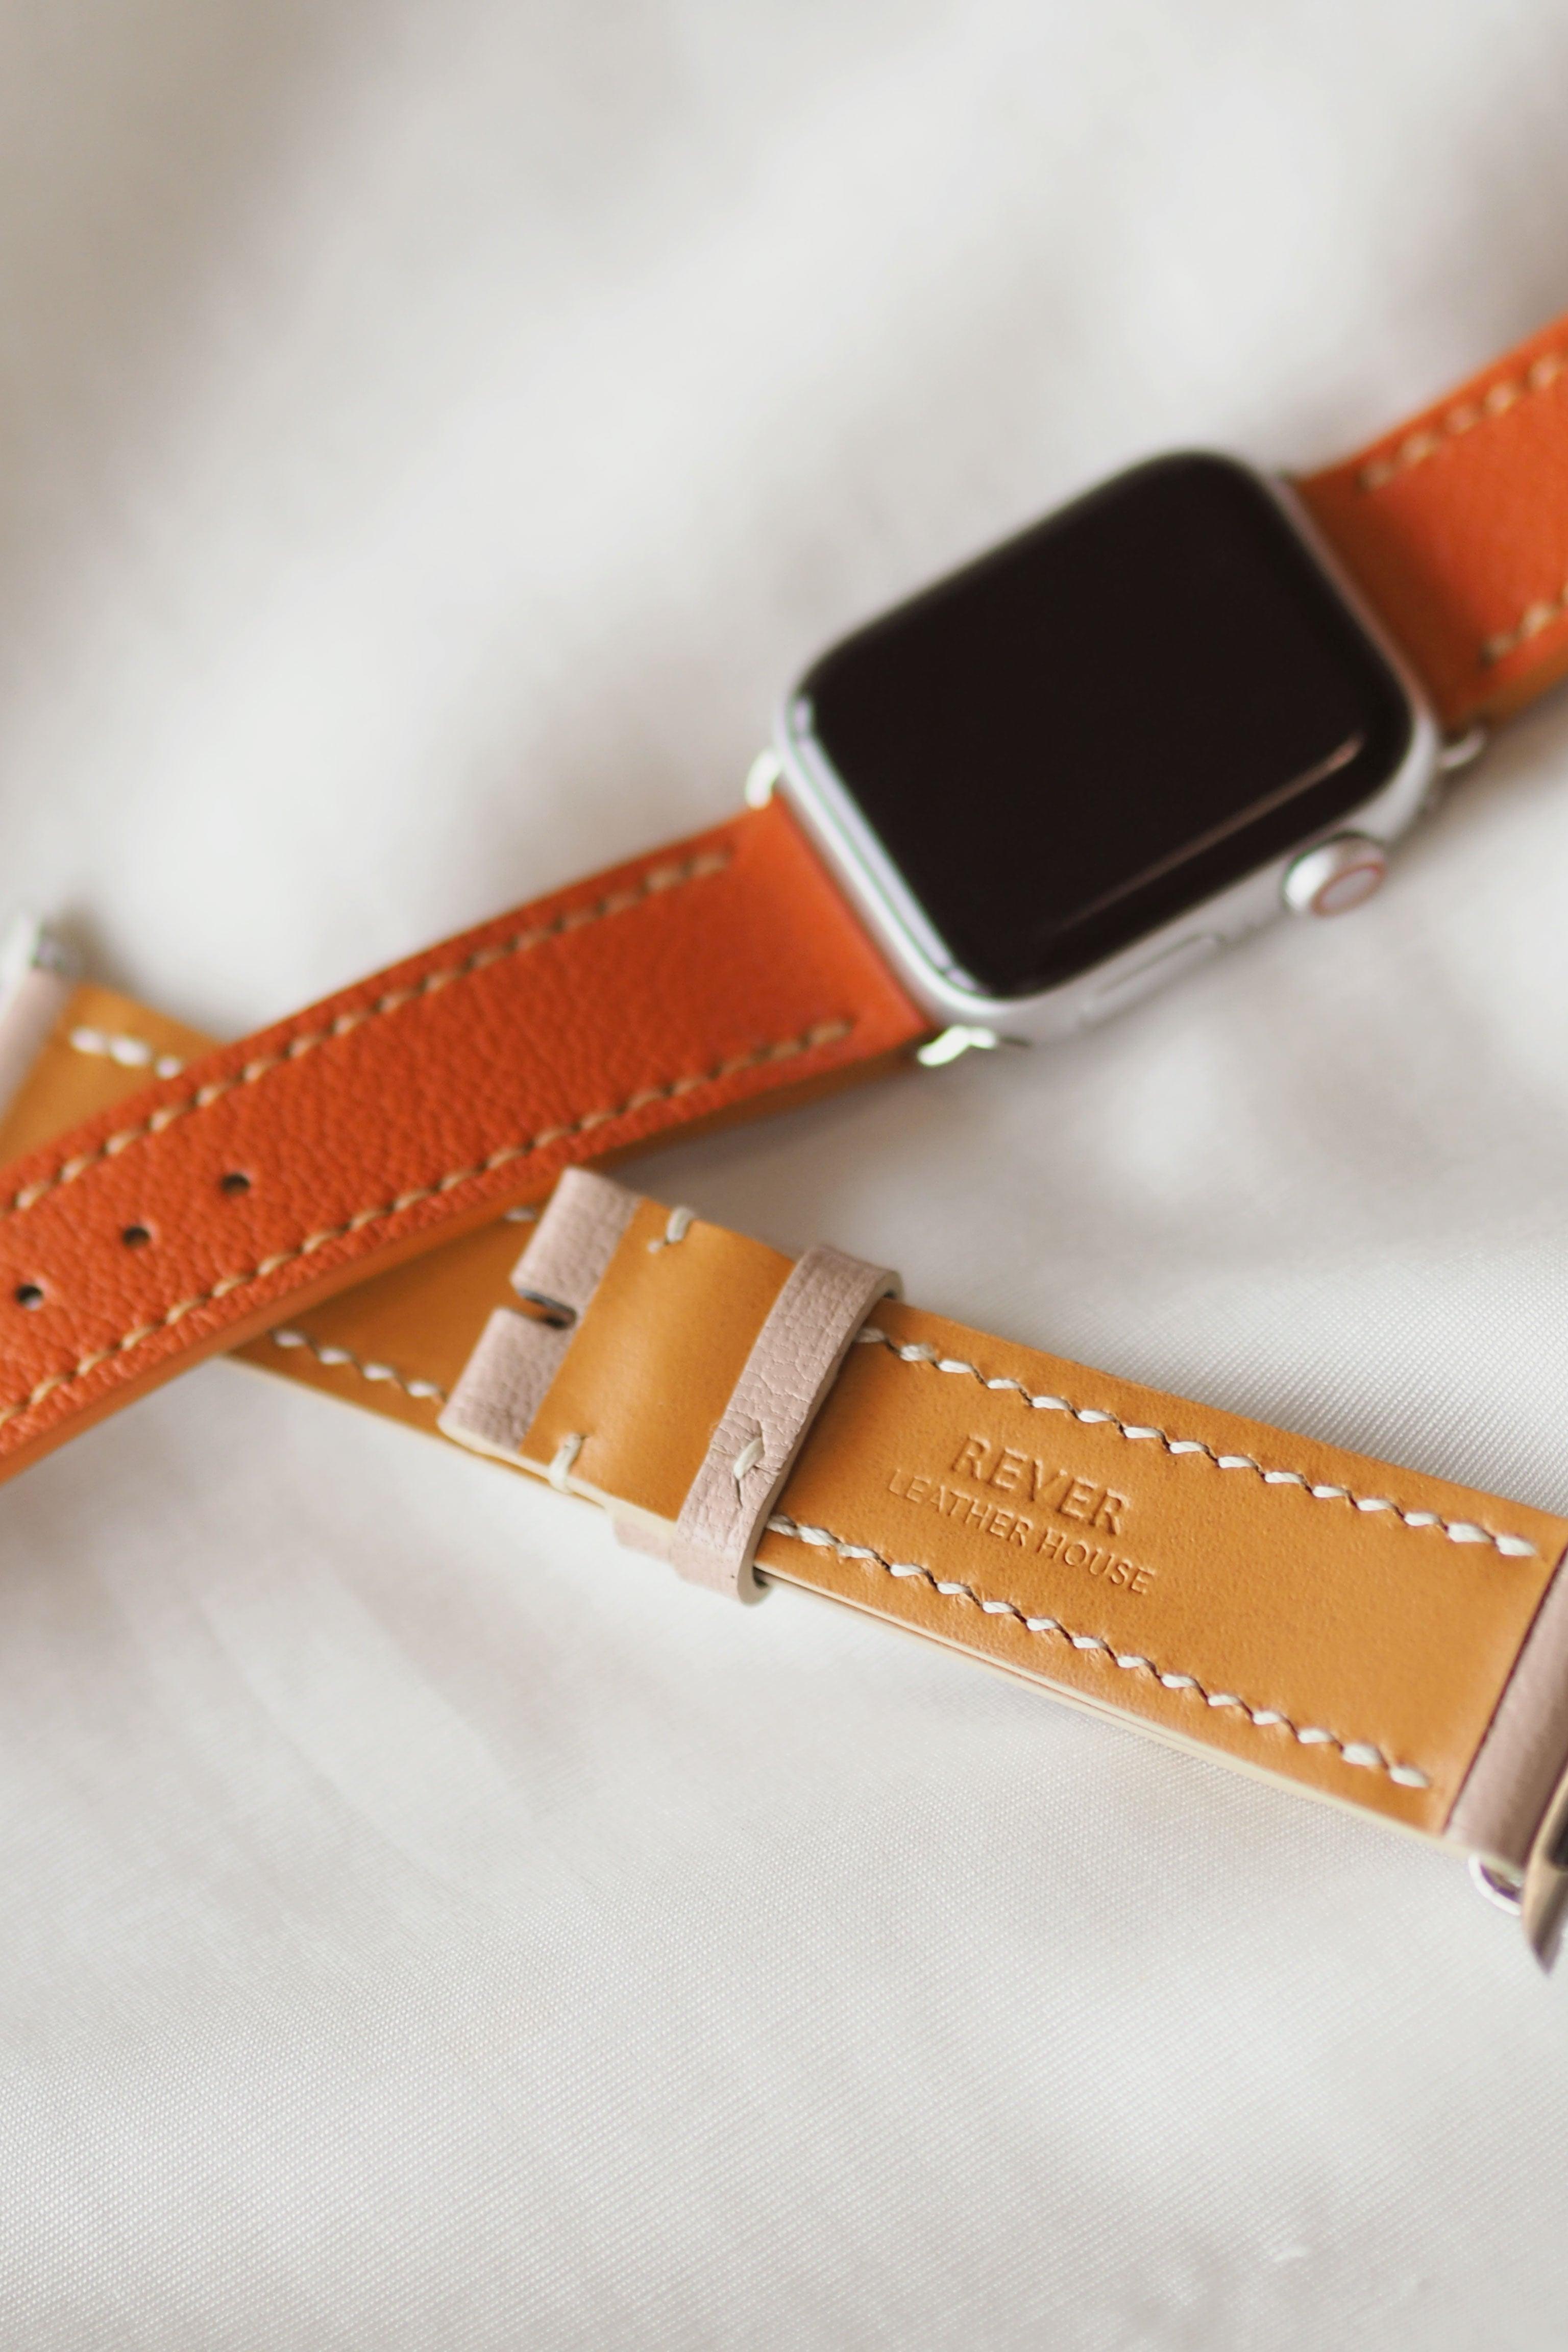 Counting down ⌚️ - Rever Leather Goods